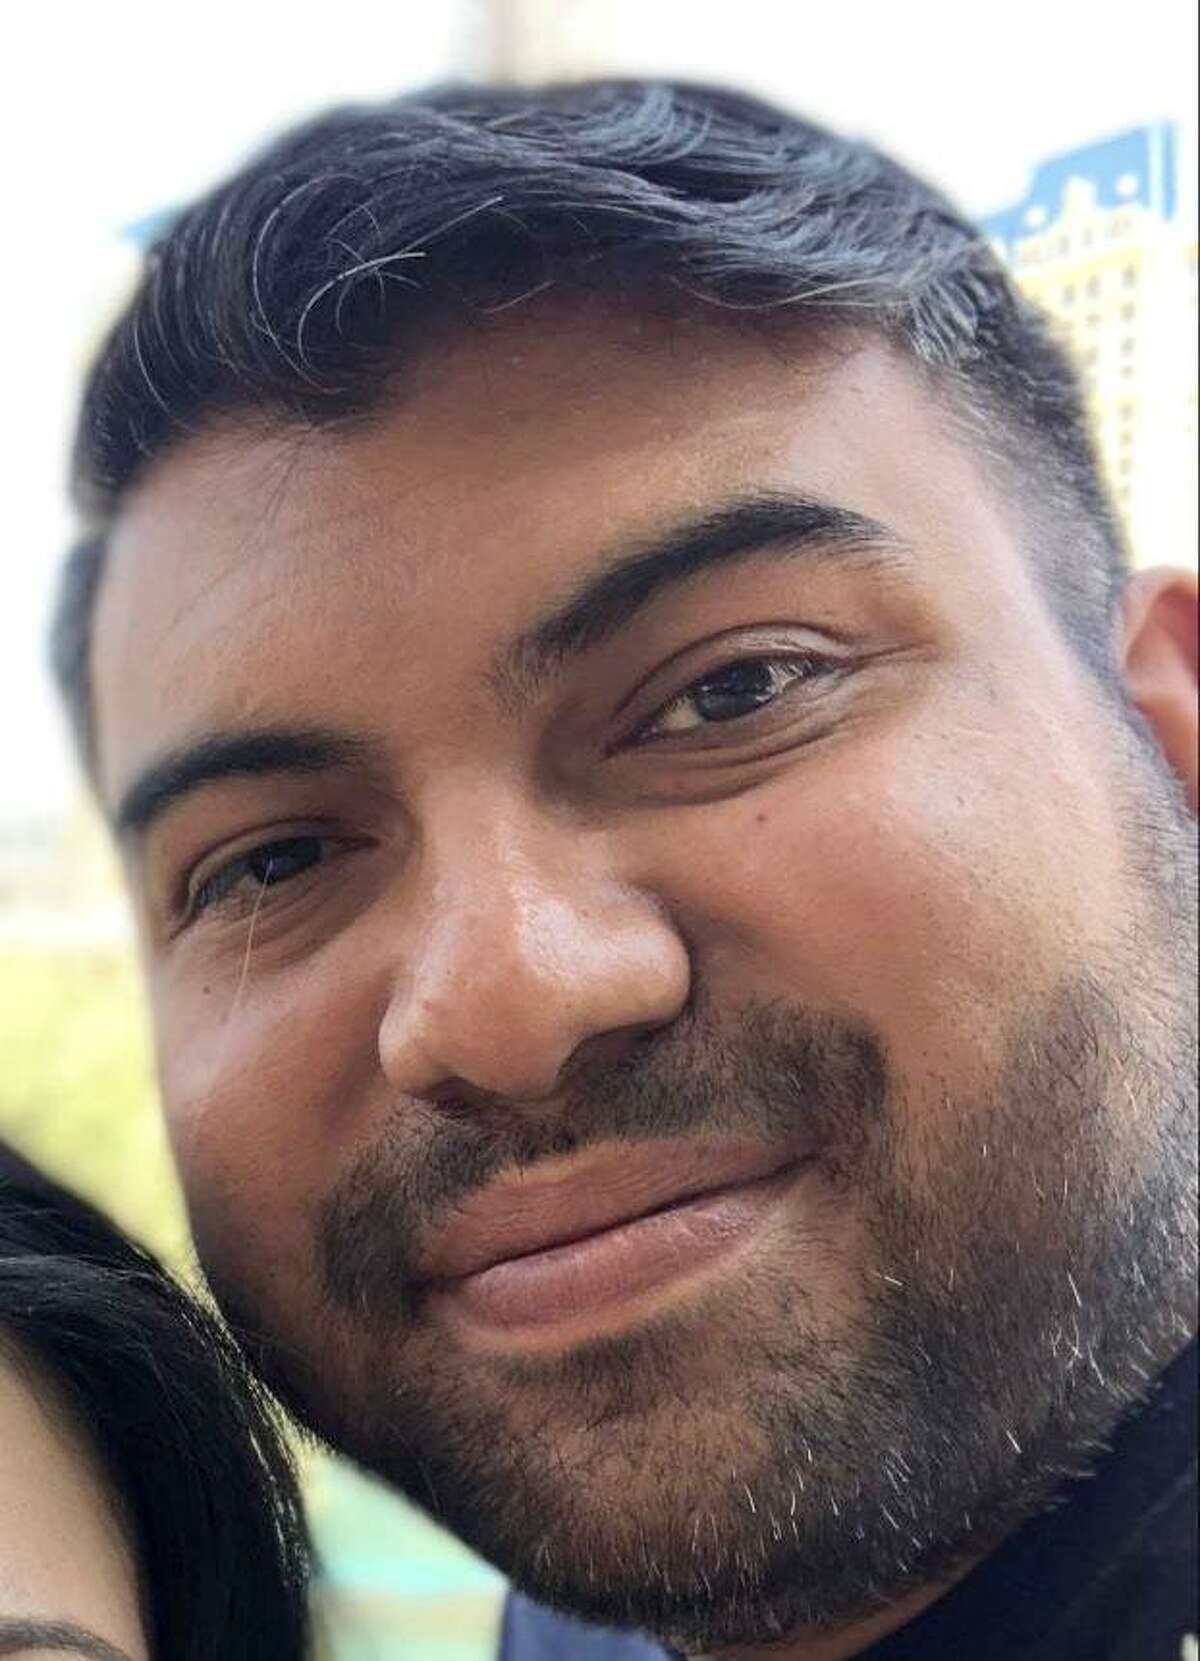 Jose Velazquez, who went missing on June 26, was found alive on Saturday afternoon in his crashed car in The Woodlands.